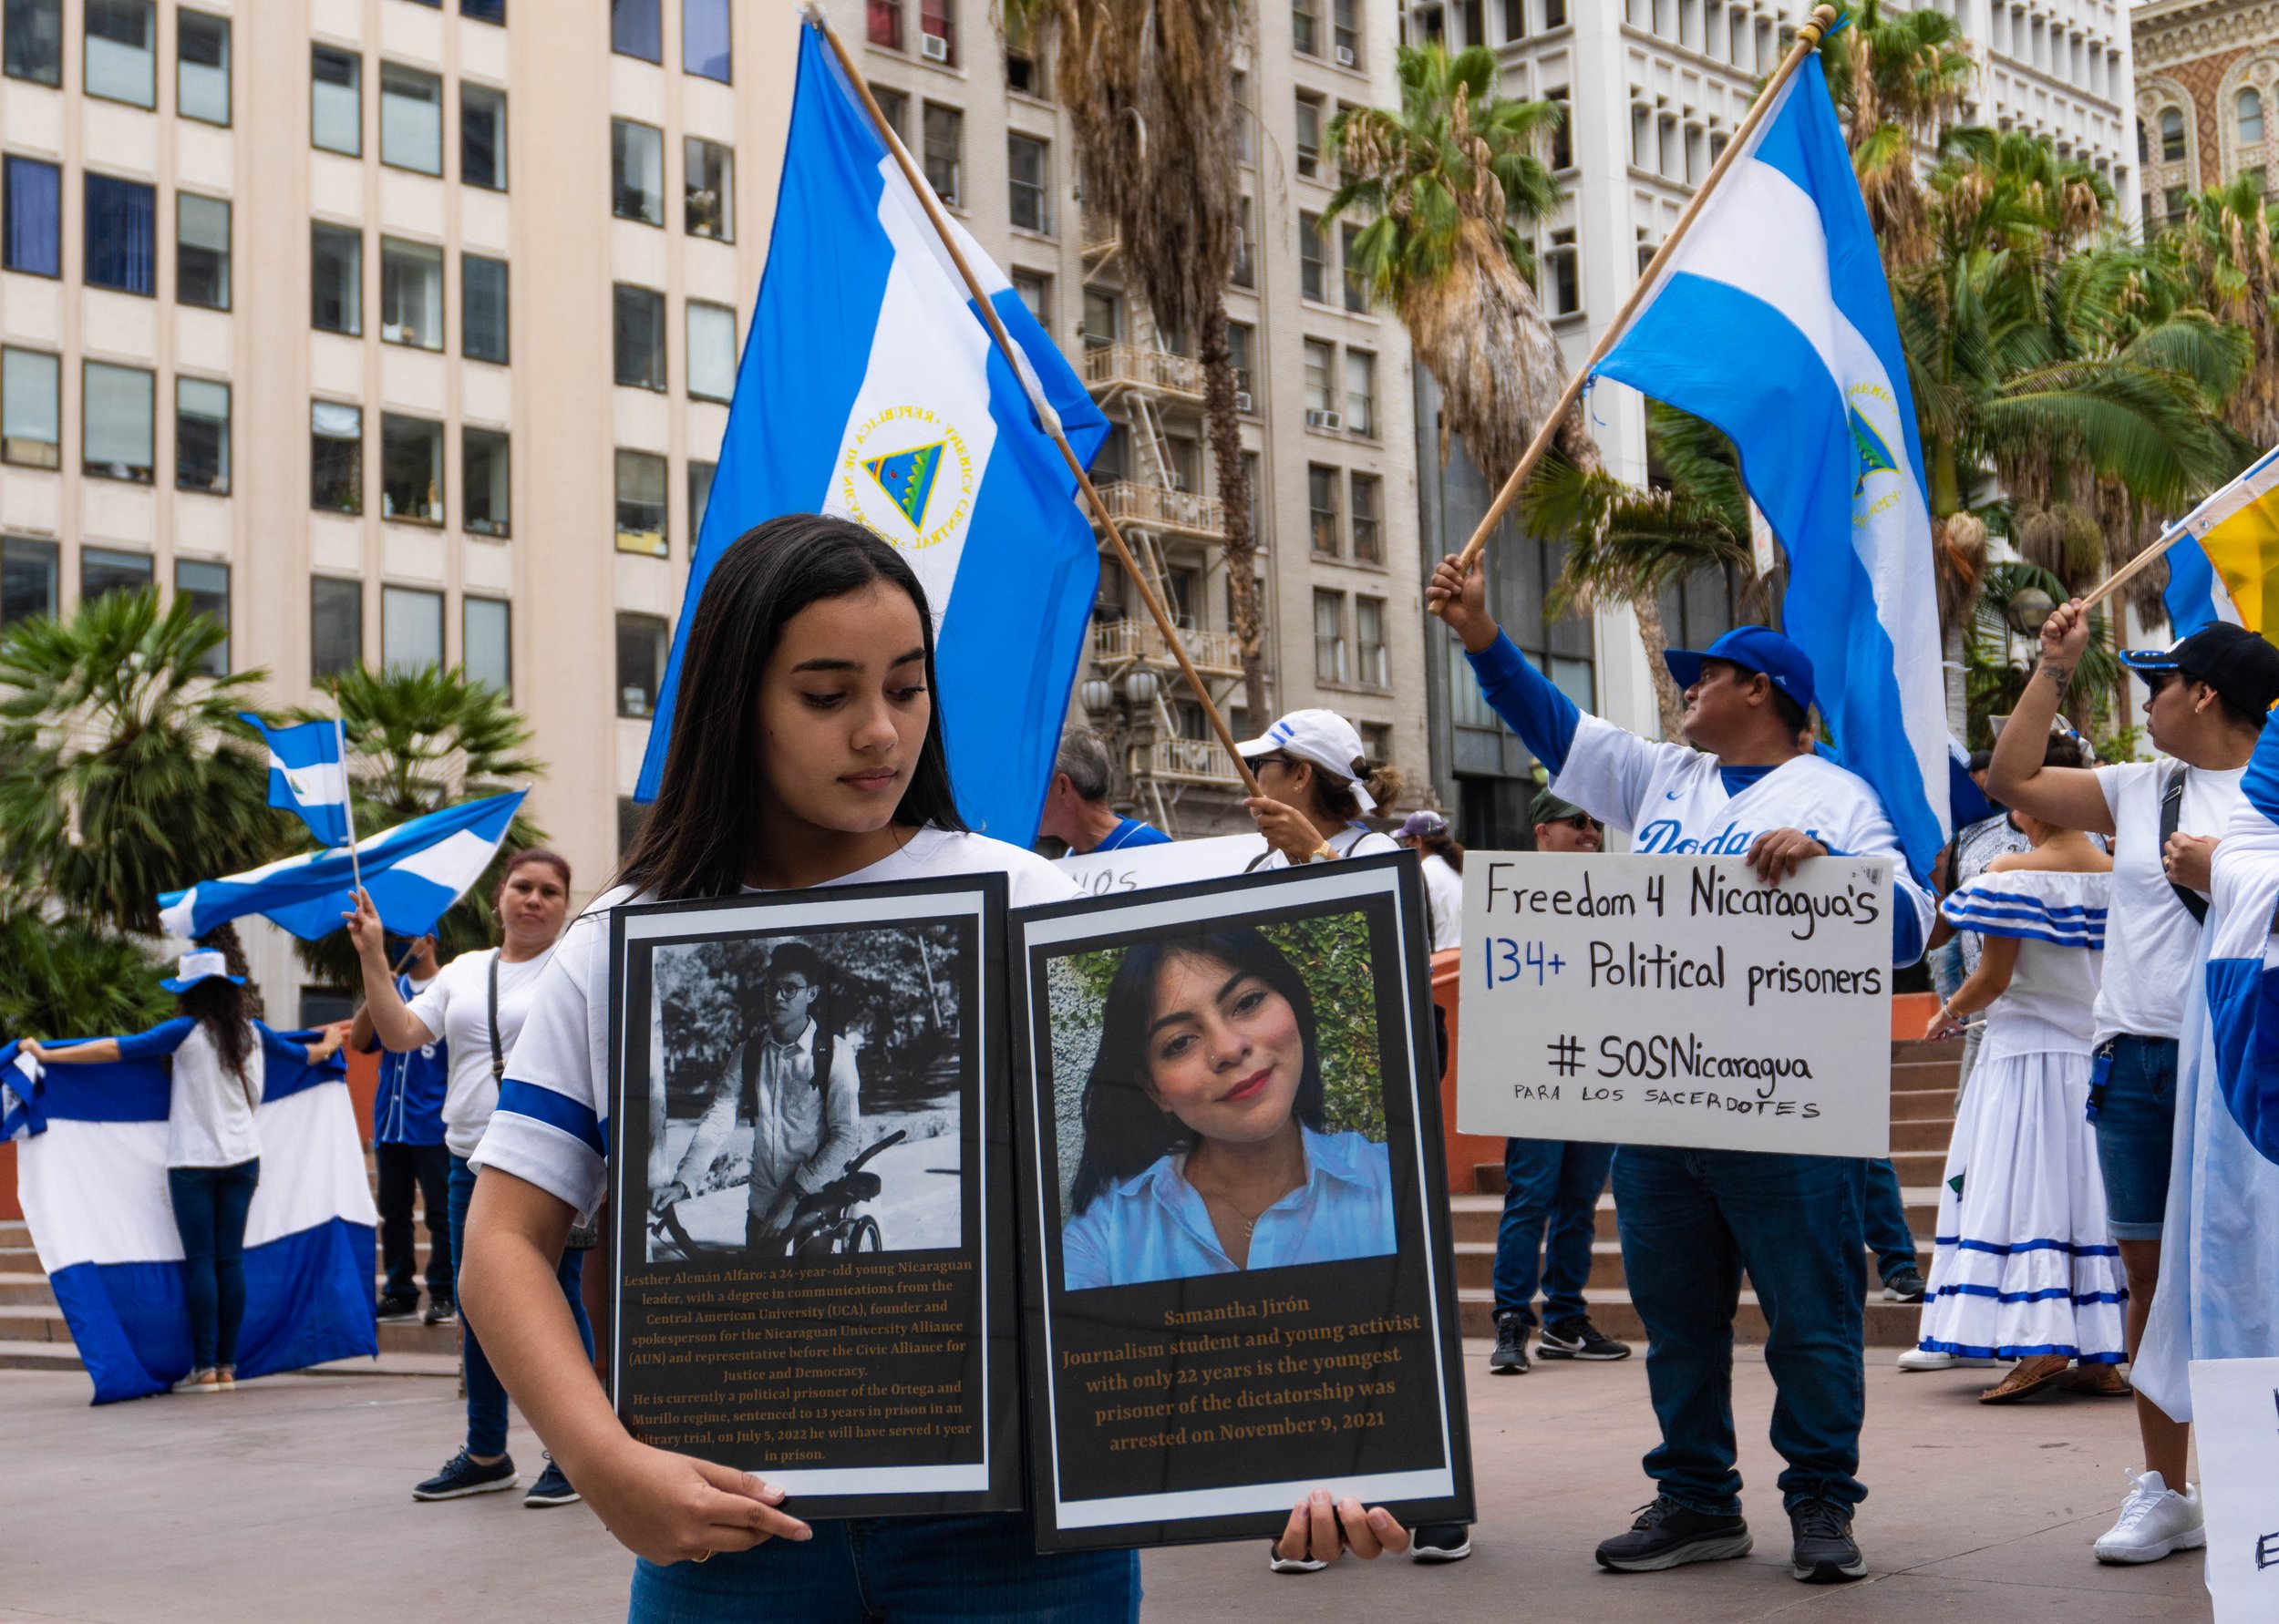  Leonela Mendoza Gadea fled Nicaragua 3 weeks ago to avoid the dictatorship that placed youths, Lesther Aleman Alfaro and Samantha Jiron in prison. Sept. 17, 2022. Los Angeles, CA. (Ee Lin Tsen | The Corsair) 